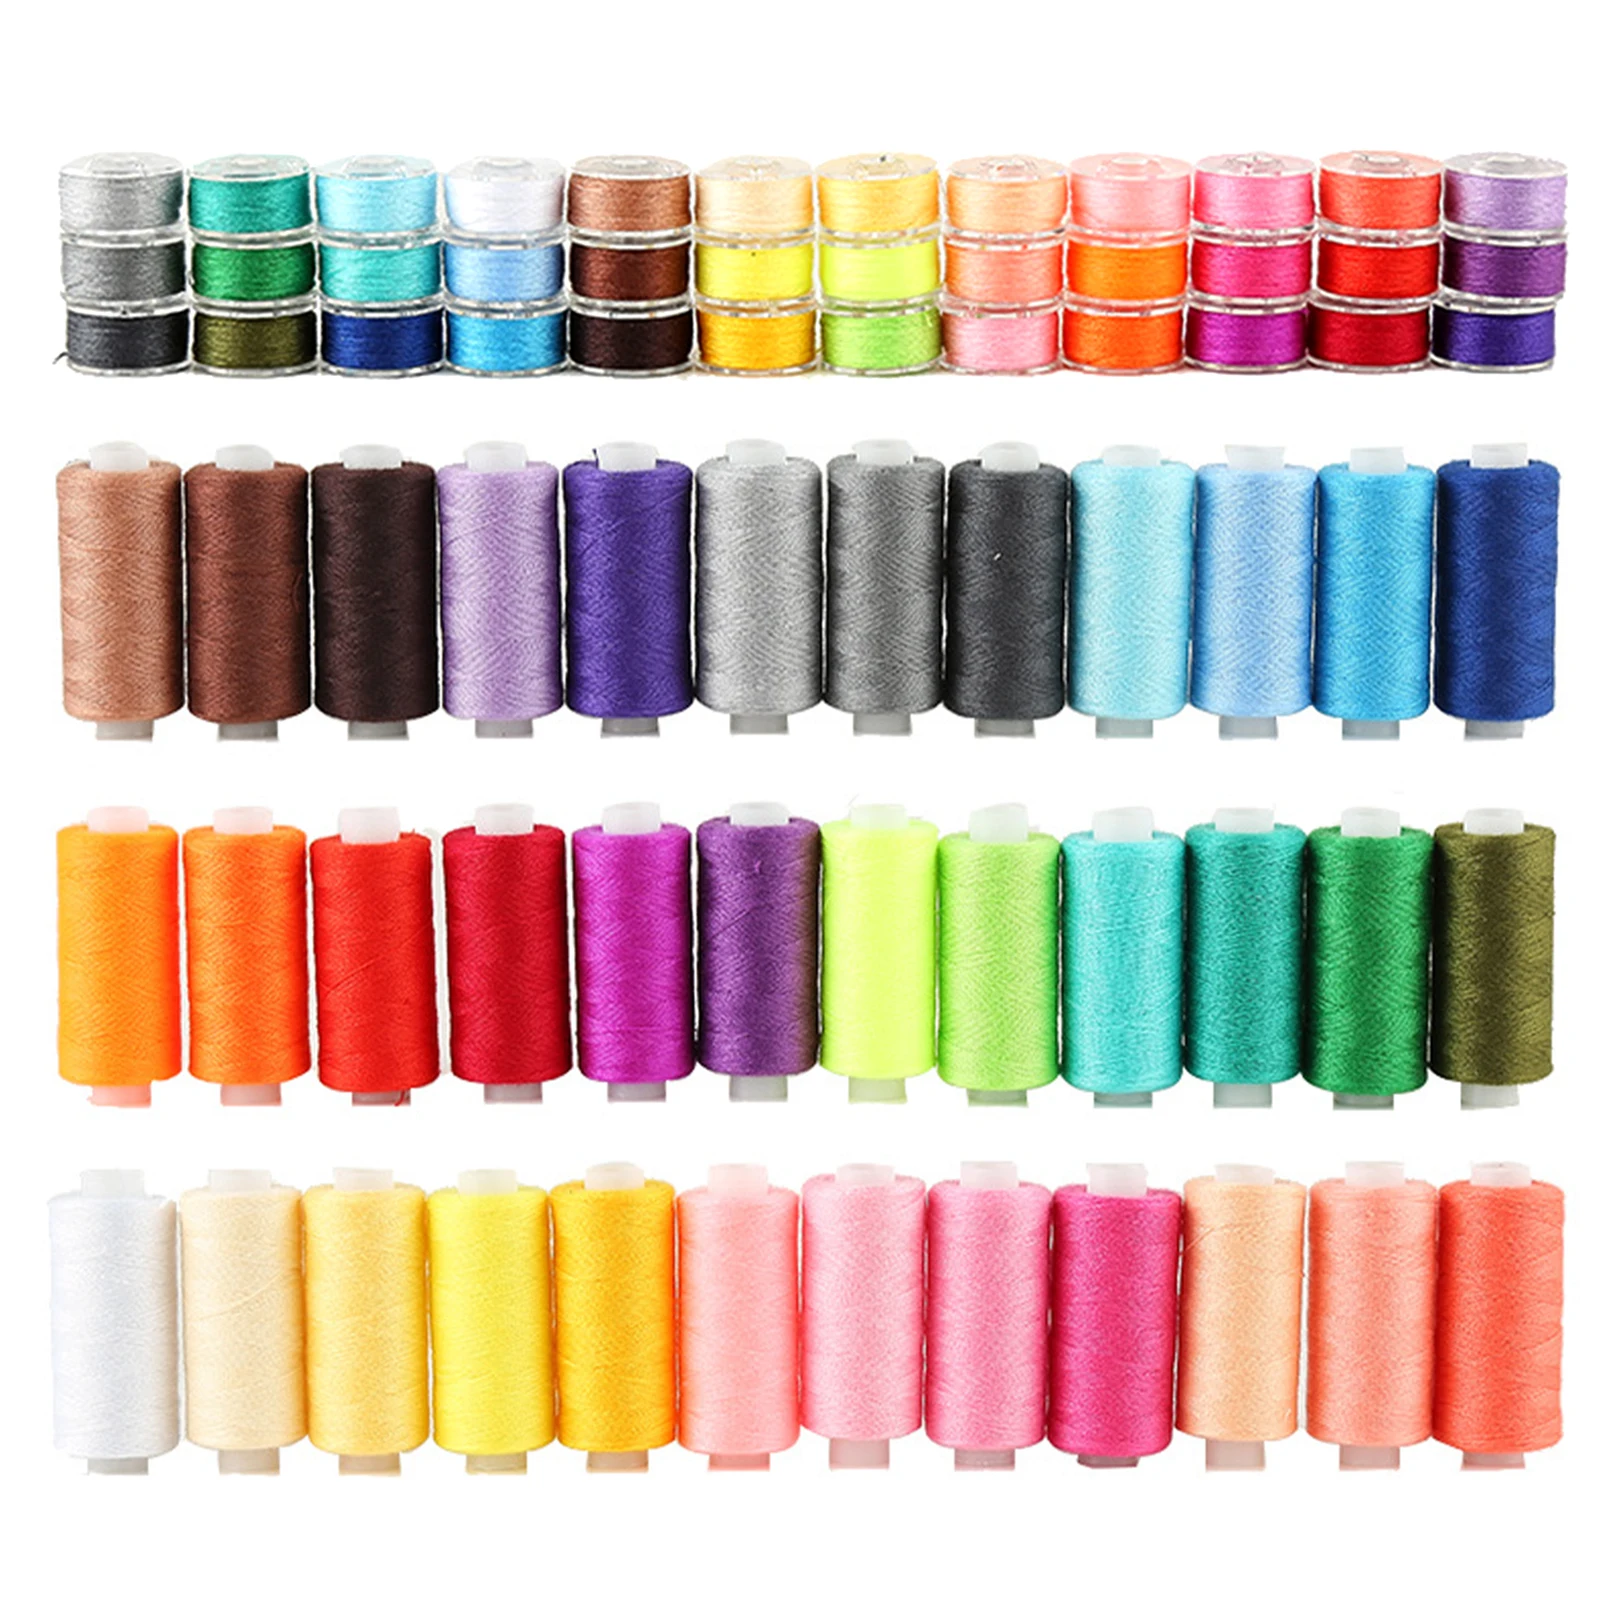 

72pcs Embroidery Sewing Thread Set For Machine Polyester Prewound Bobbin Quilting Spools 38yards 400yards Accessories 36 Colors